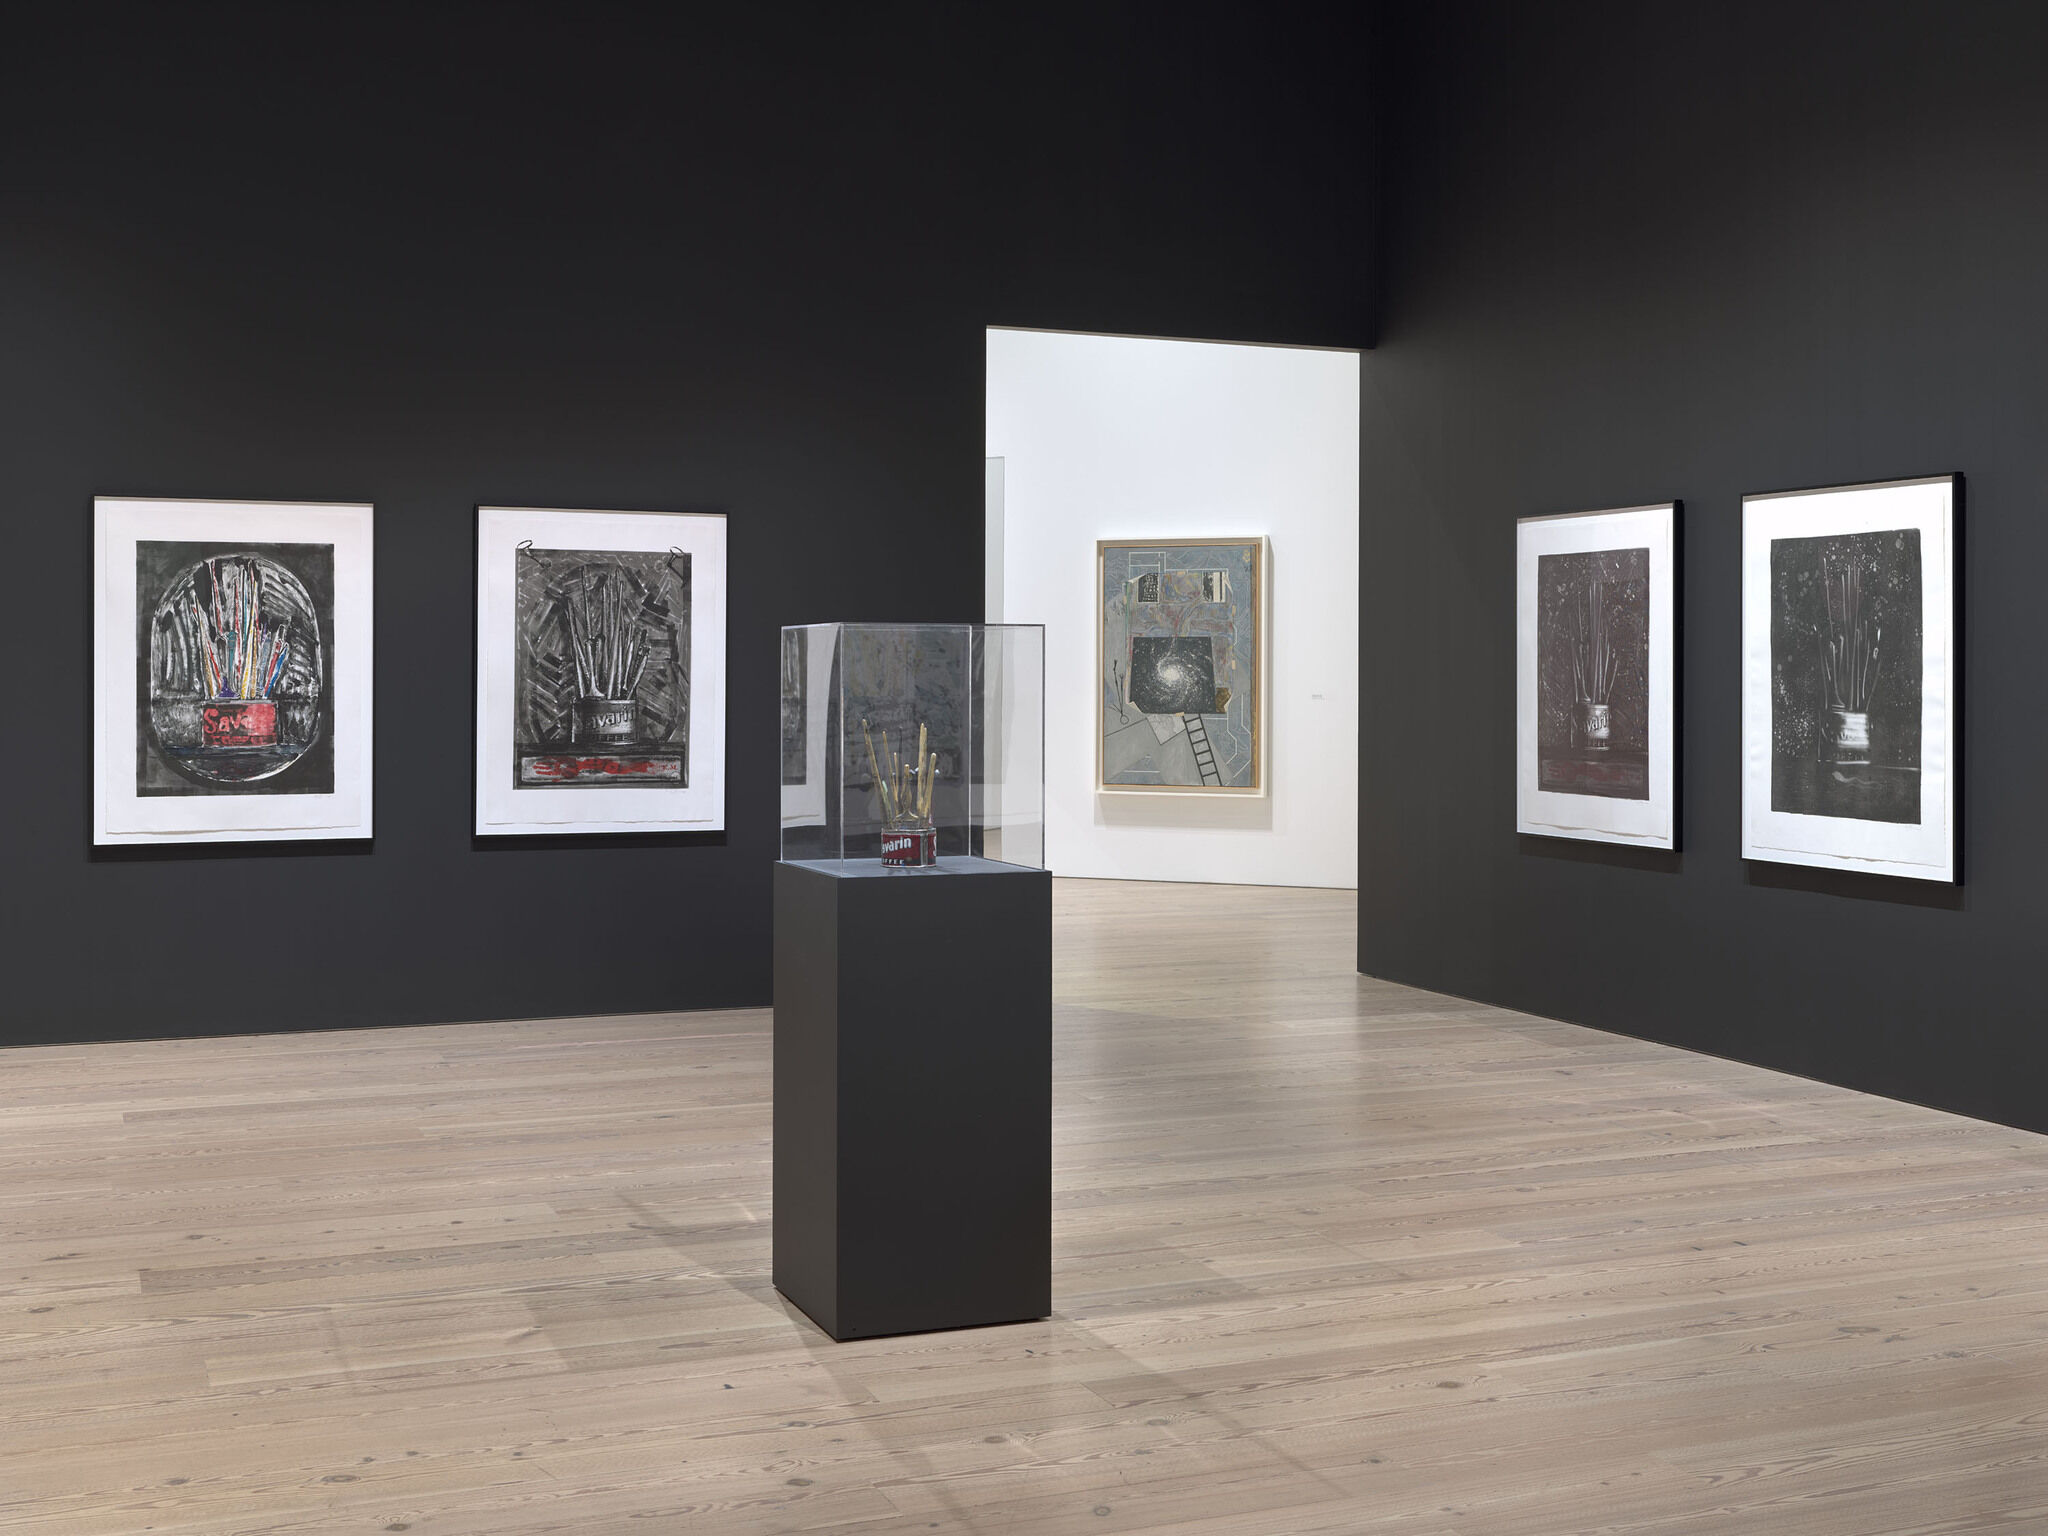 A black and white exhibition room with five framed works mounted on the walls and a sixth encased work in the center of the room.